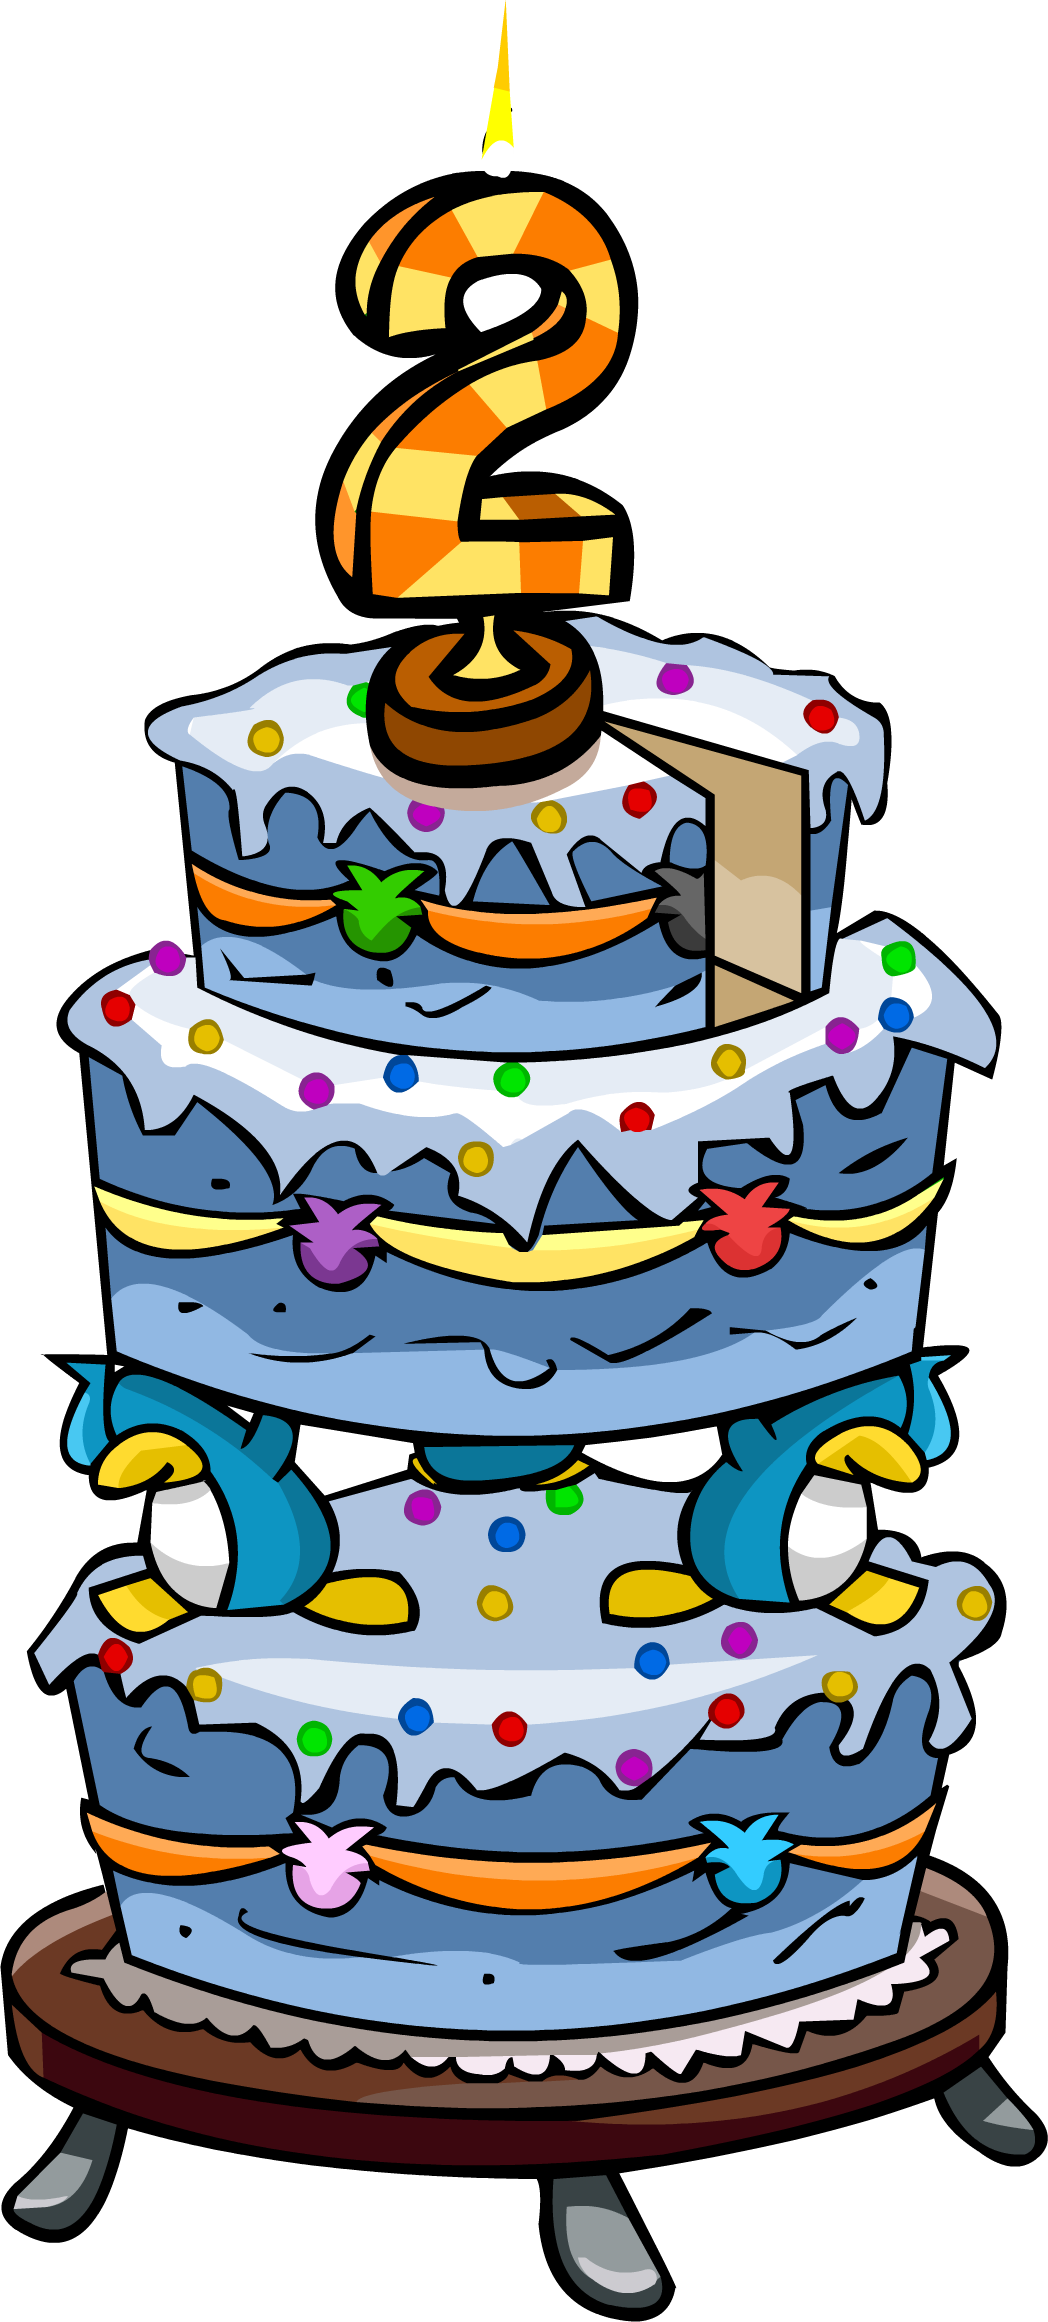 9th Anniversary Celebration png images | PNGEgg